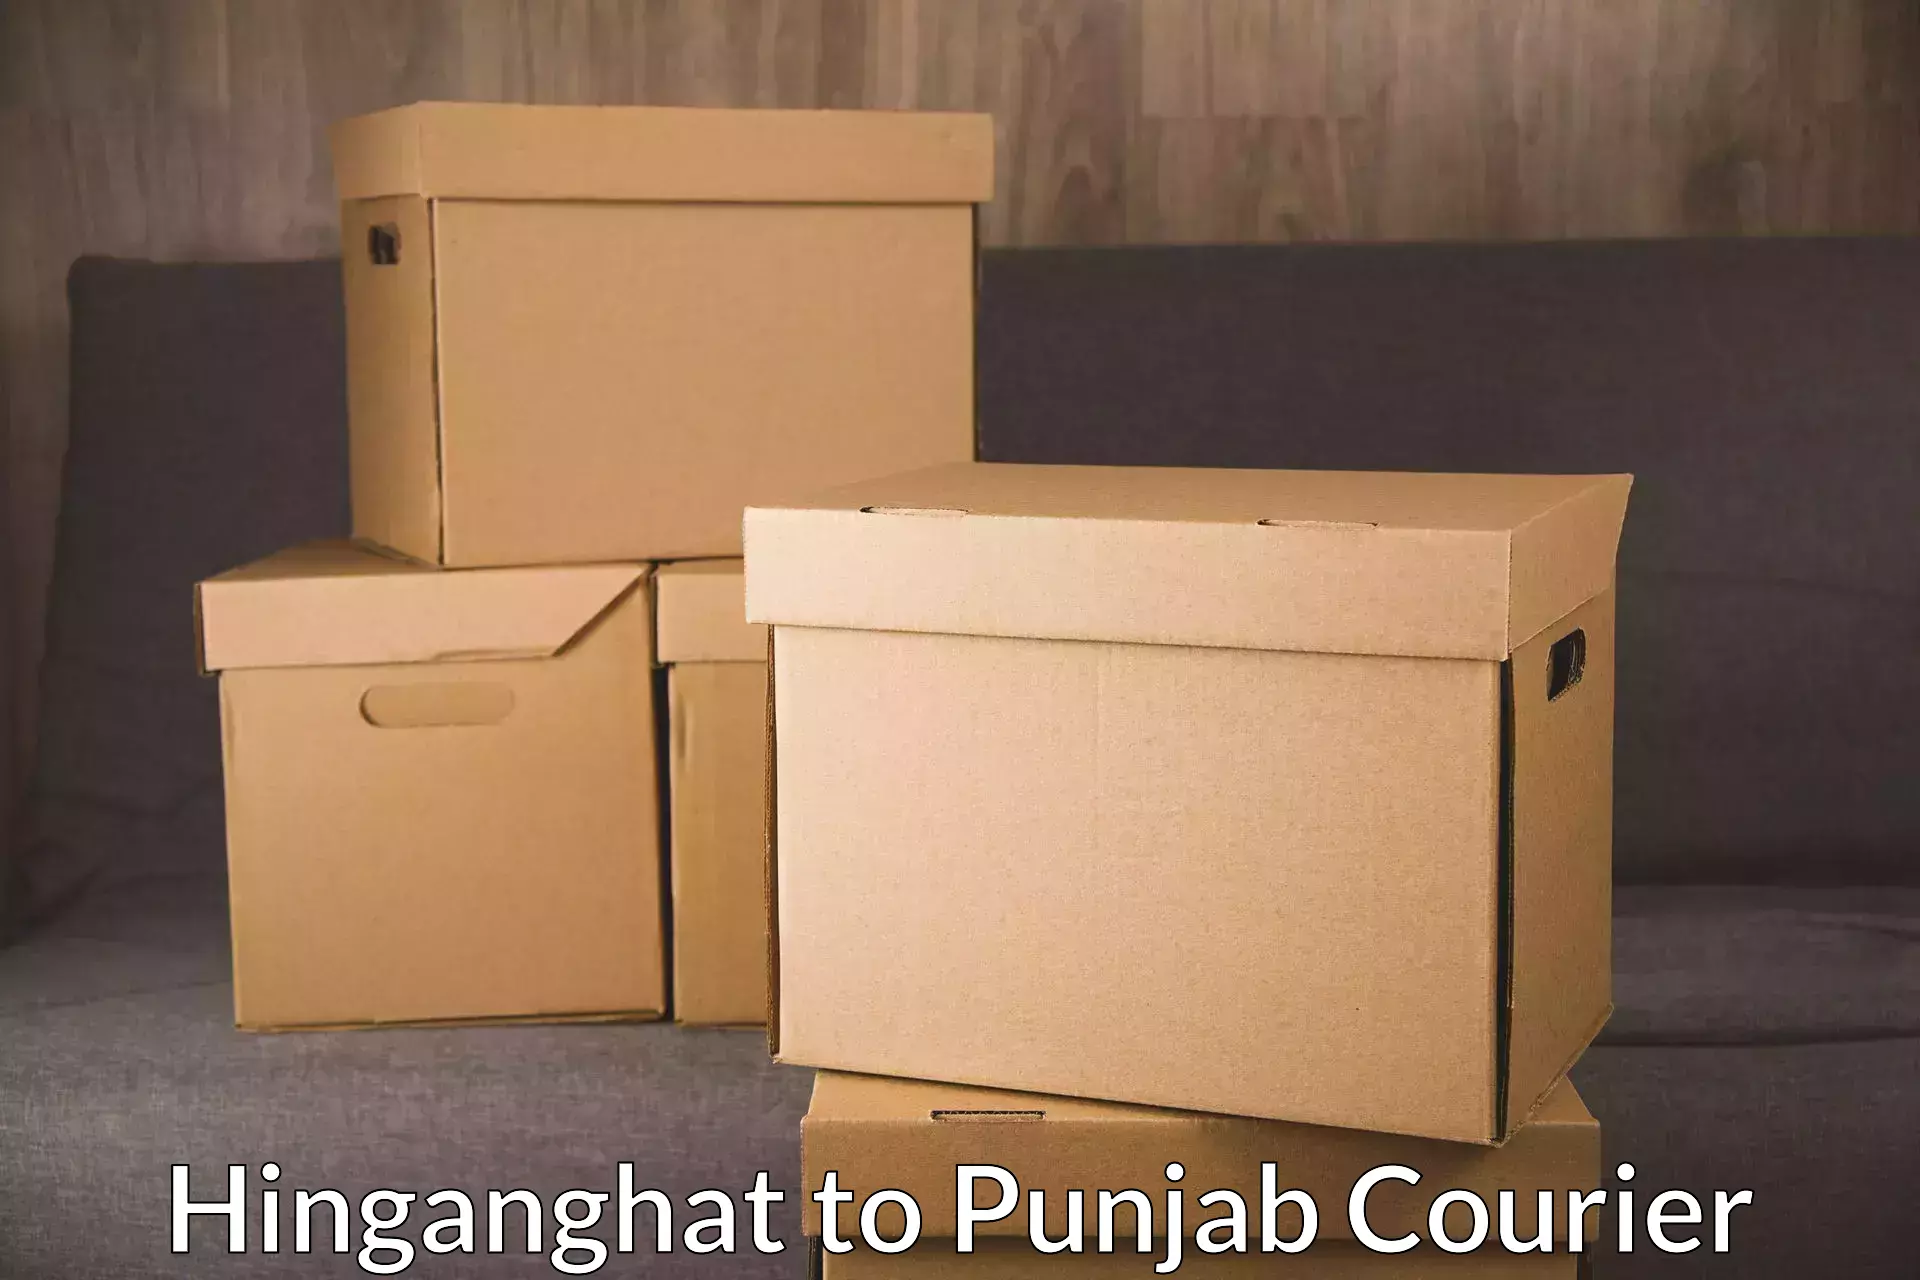 Courier service efficiency Hinganghat to Dinanagar